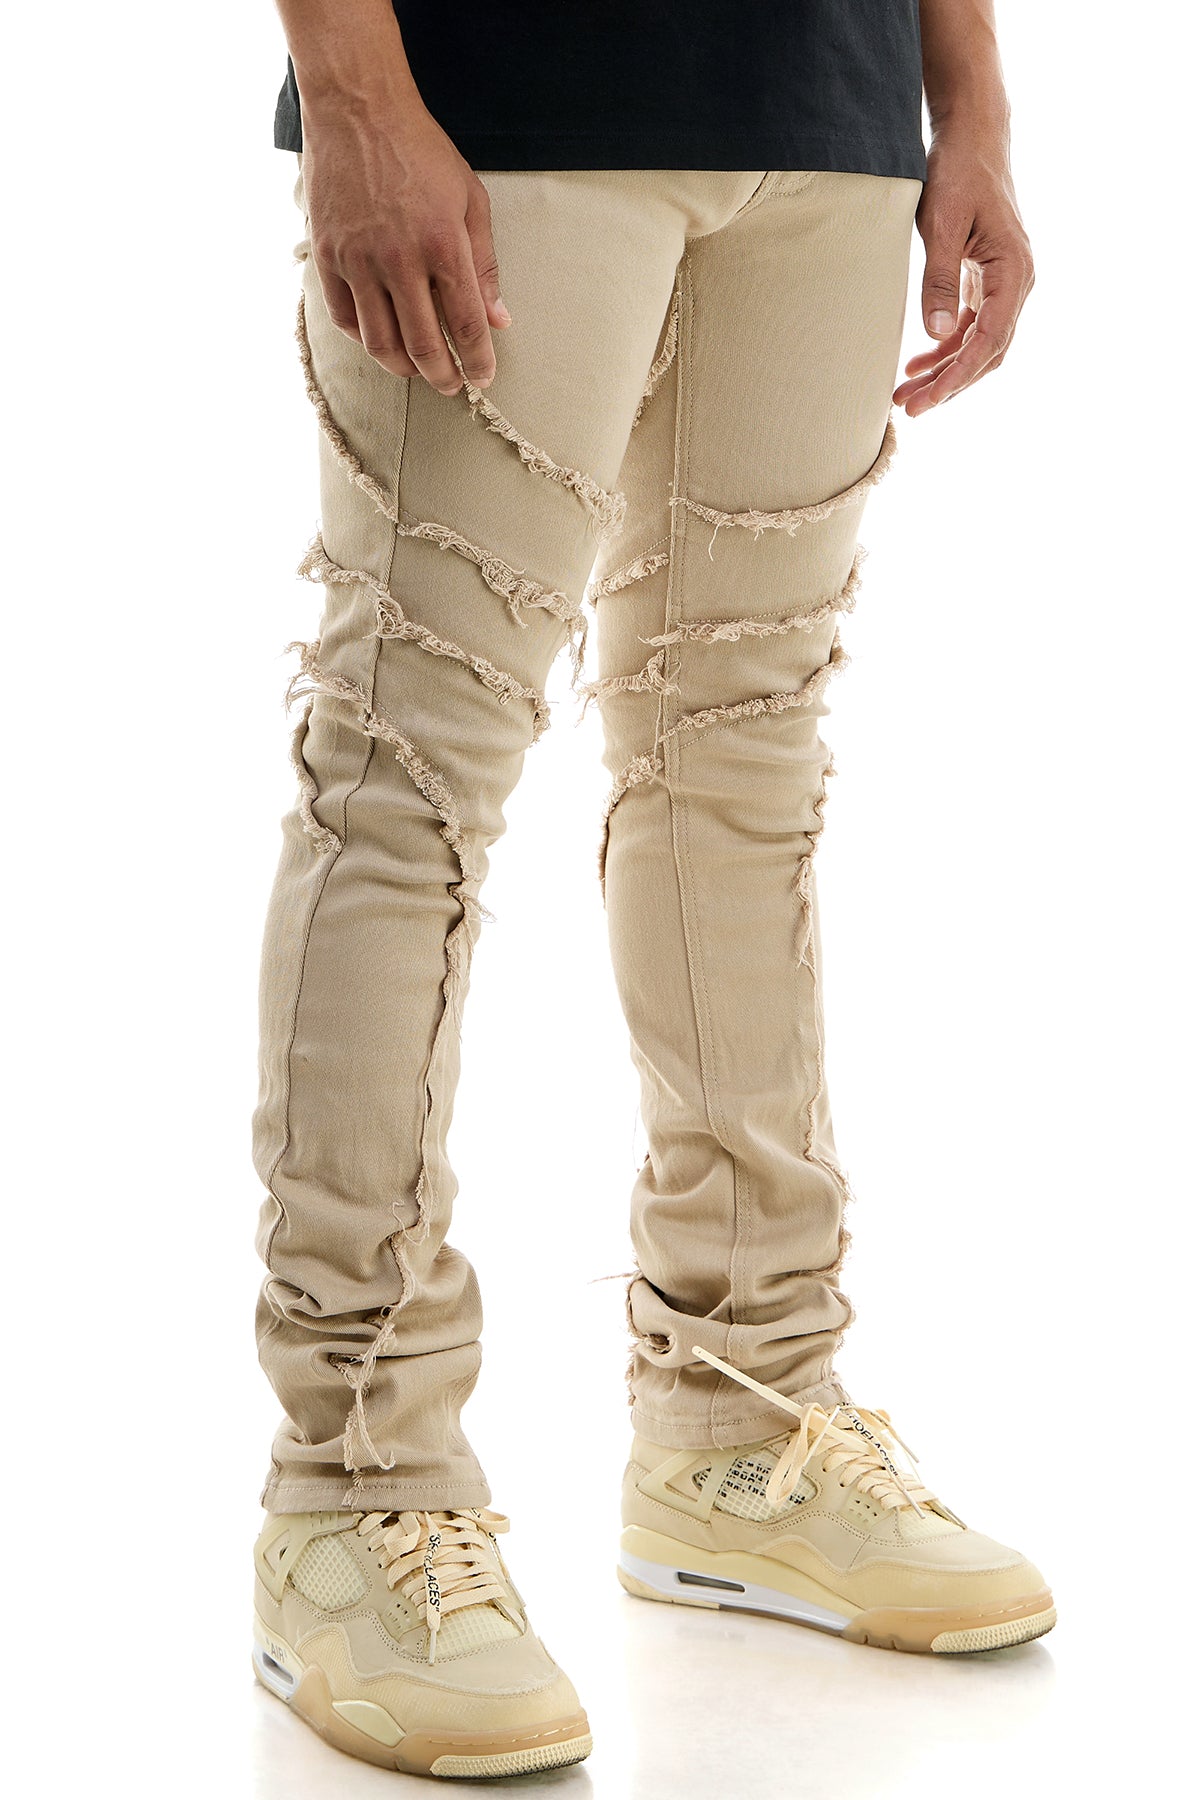 STACKED OVERLAP PANTS